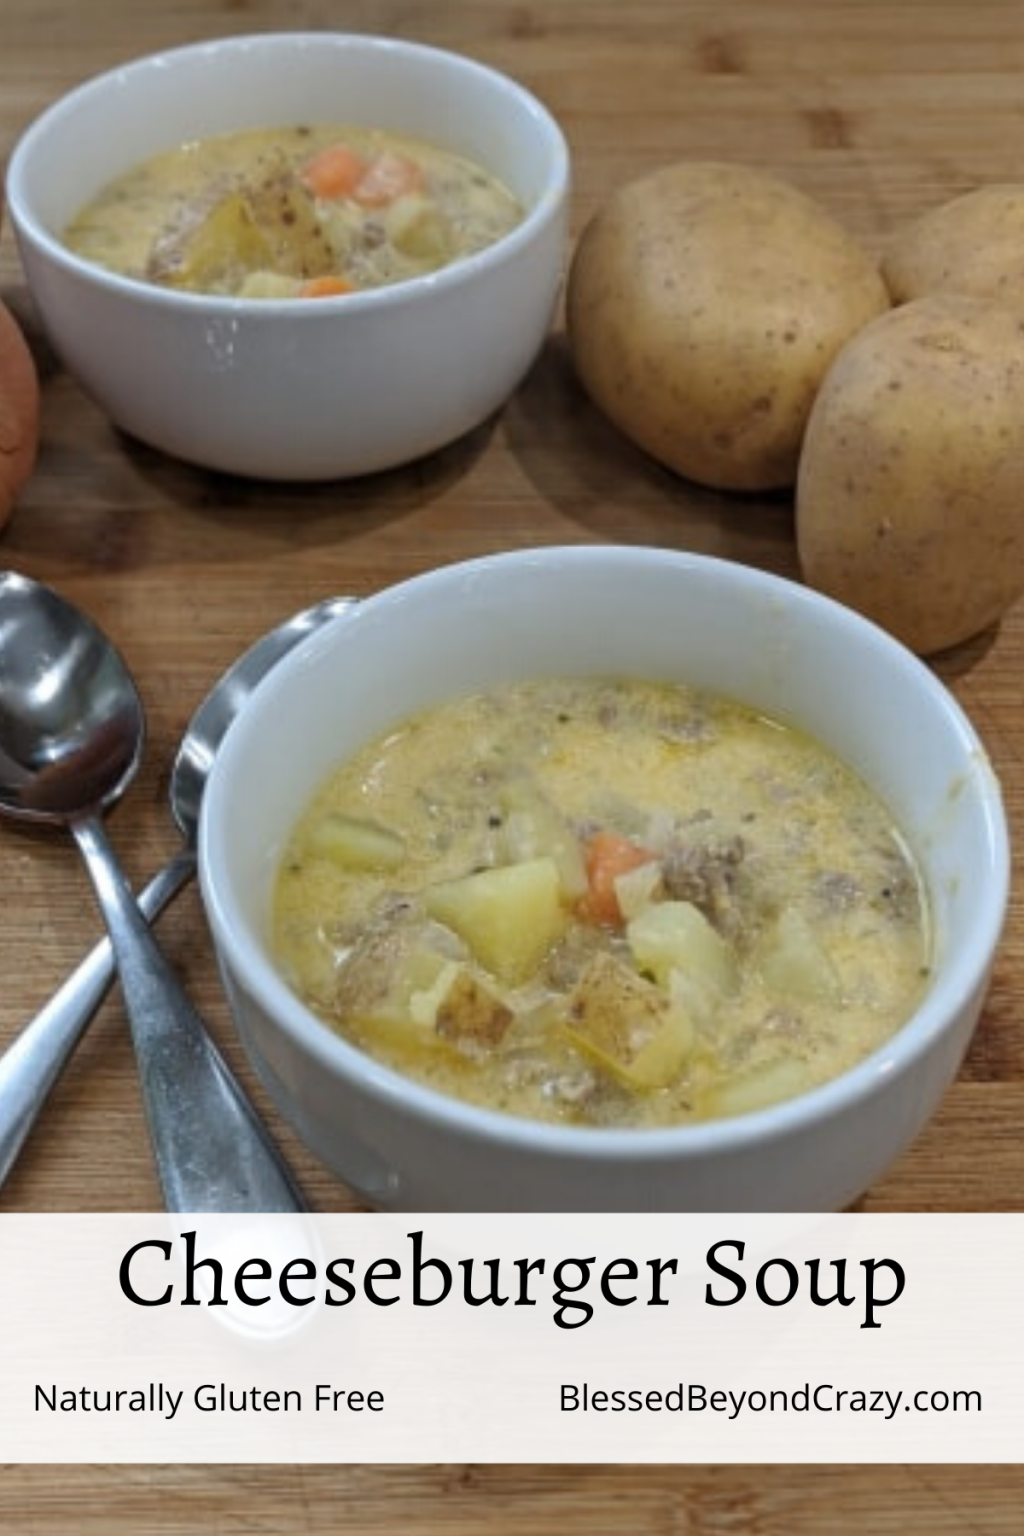 Cheeseburger Soup (Naturally Gluten Free) - Blessed Beyond Crazy